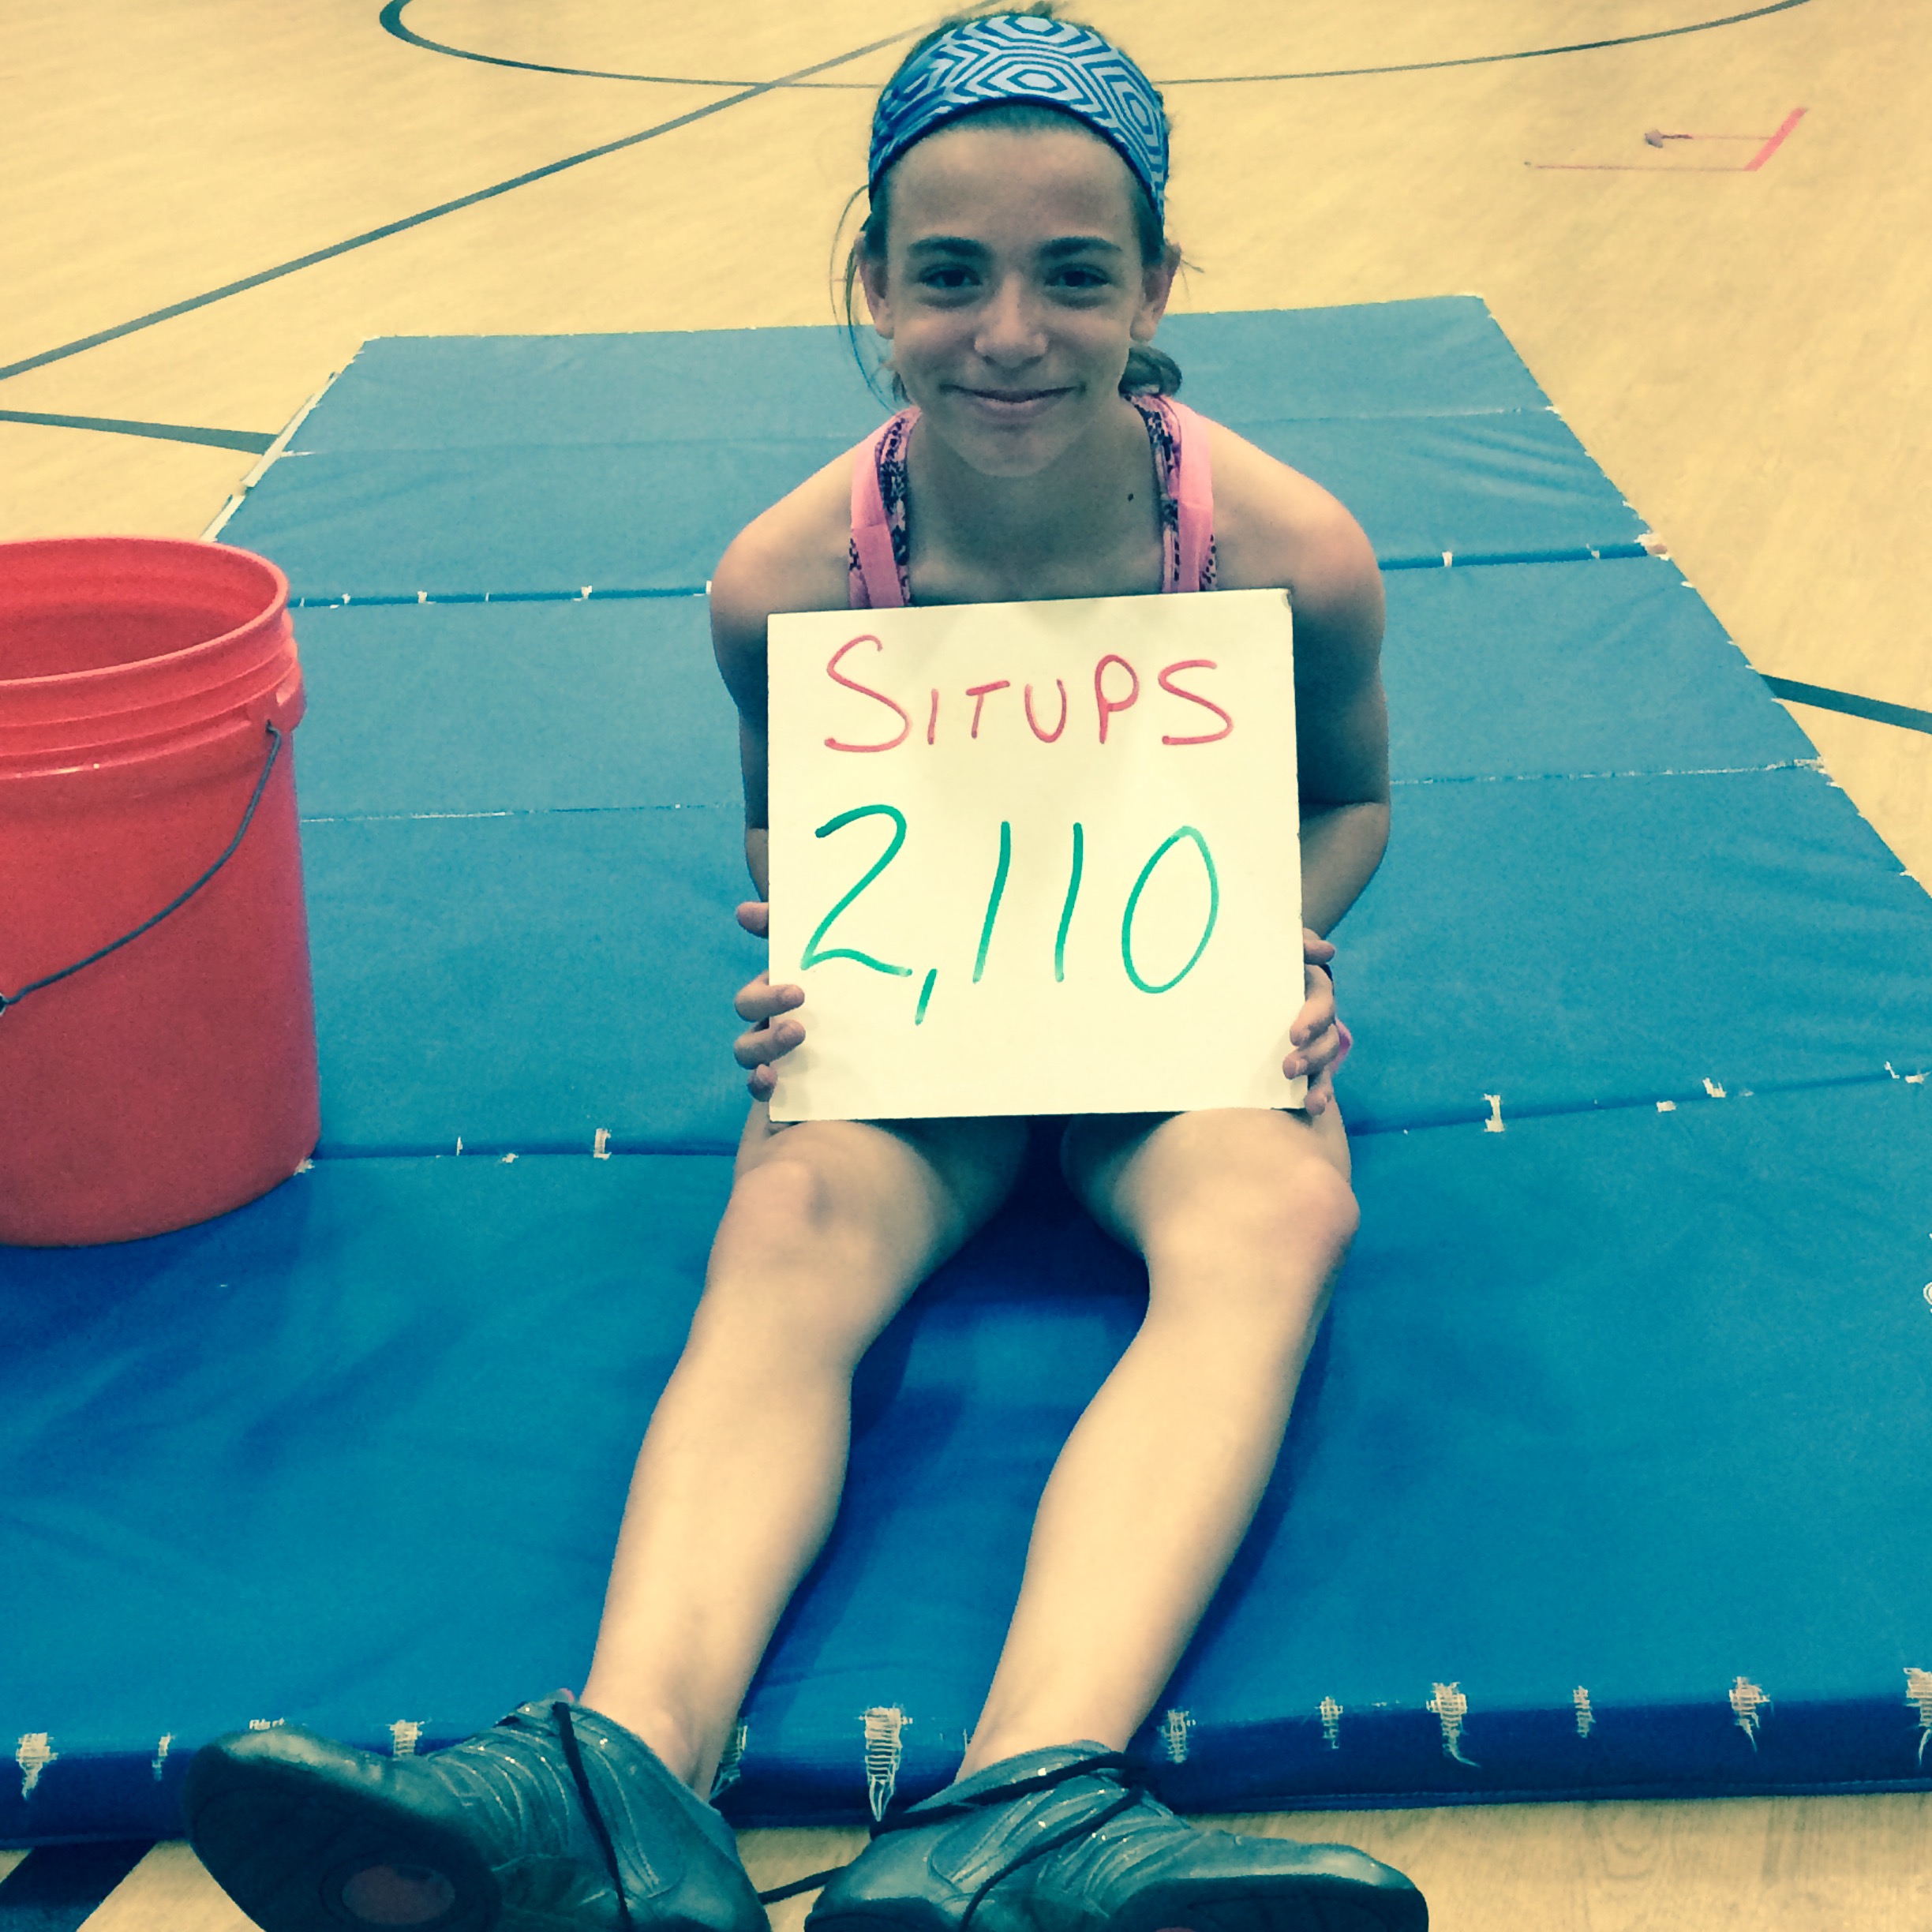 PHOTO:Kyleigh Bass, 10, broke the Project Fit America record national record for the most sit-ups with 2,110 on May 7 in the gymnasium at Fox Hill Elementary School in Kansas City, Missouri. 